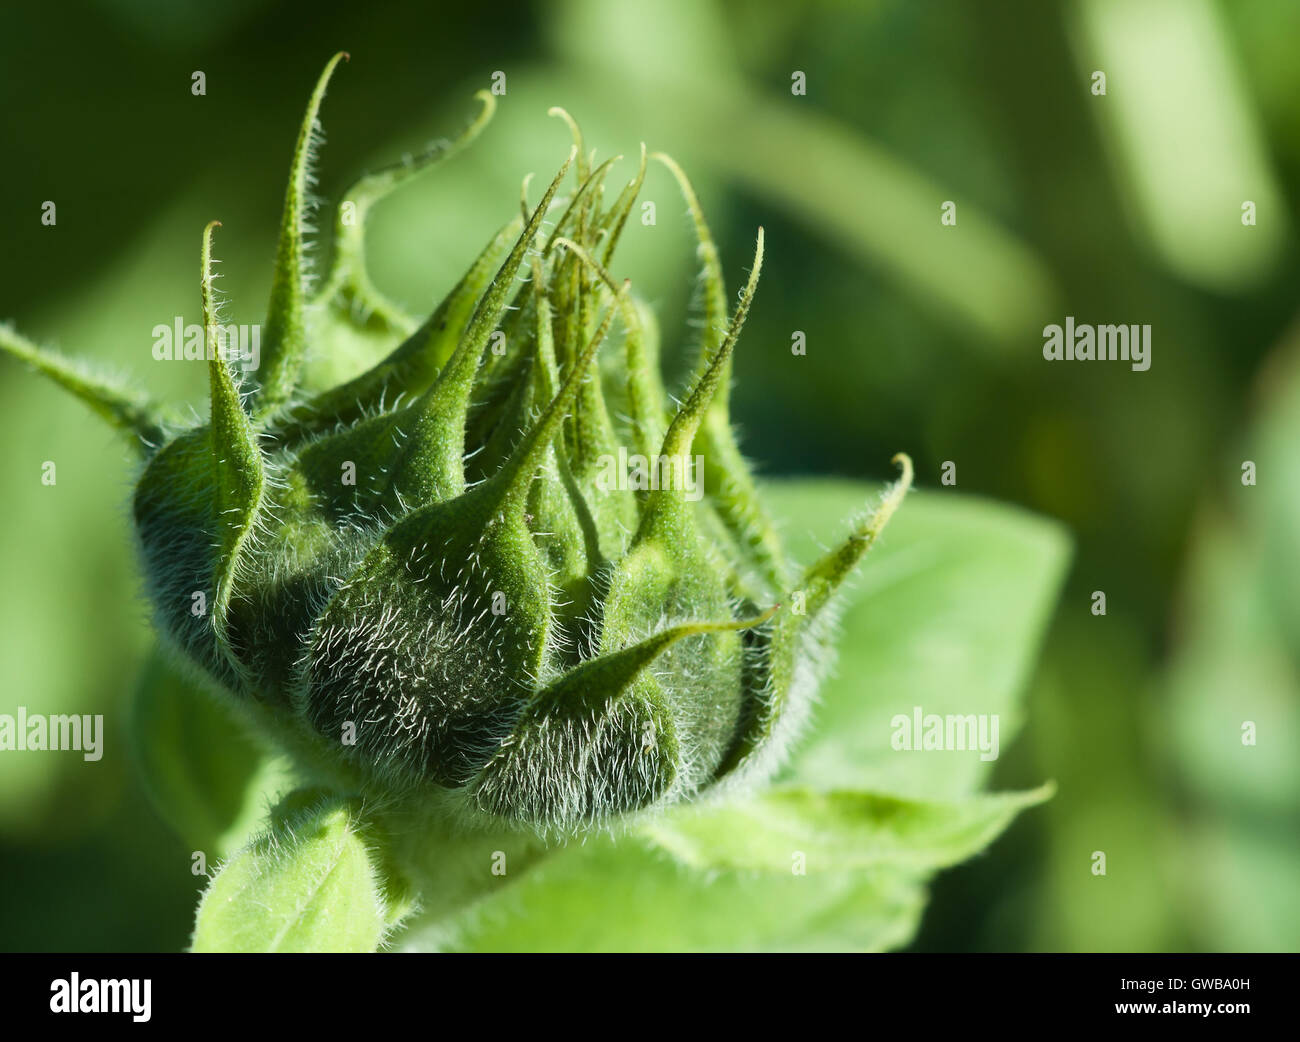 Natural environmental seasonal spring image: green young closed sunflower bud closeup with green background of other plats. Stock Photo